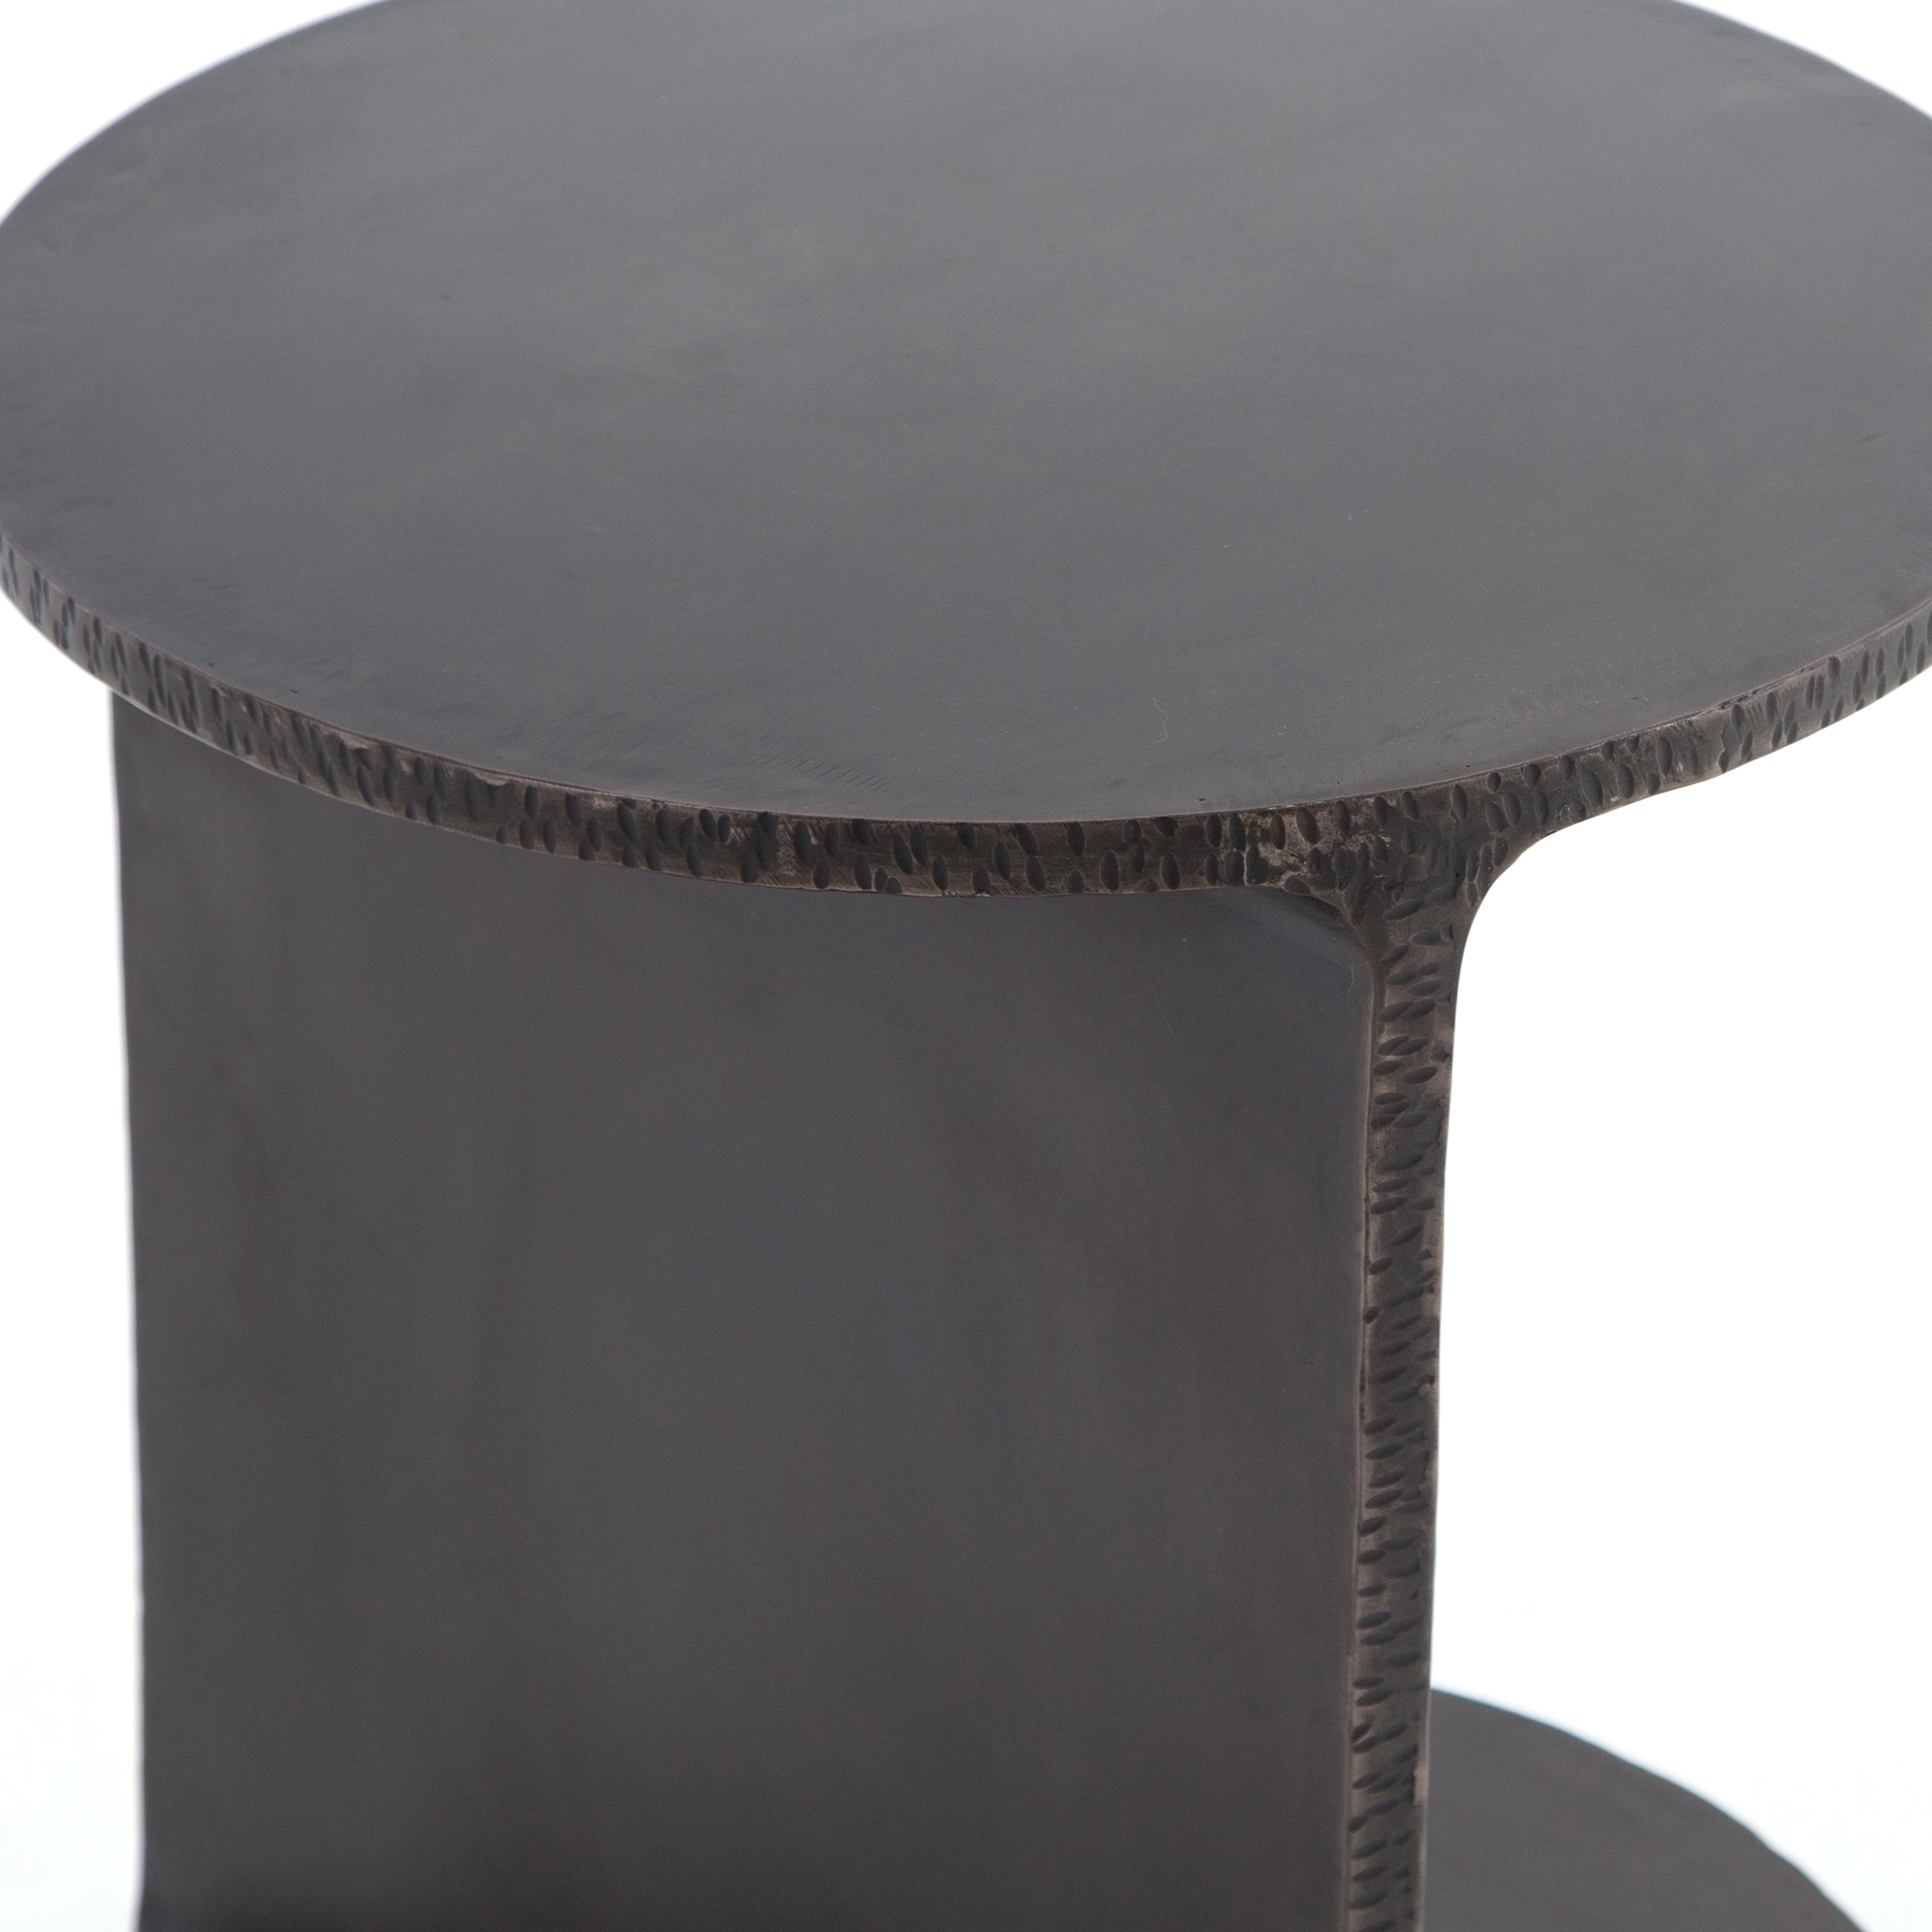 Illy Side Table - Image 2